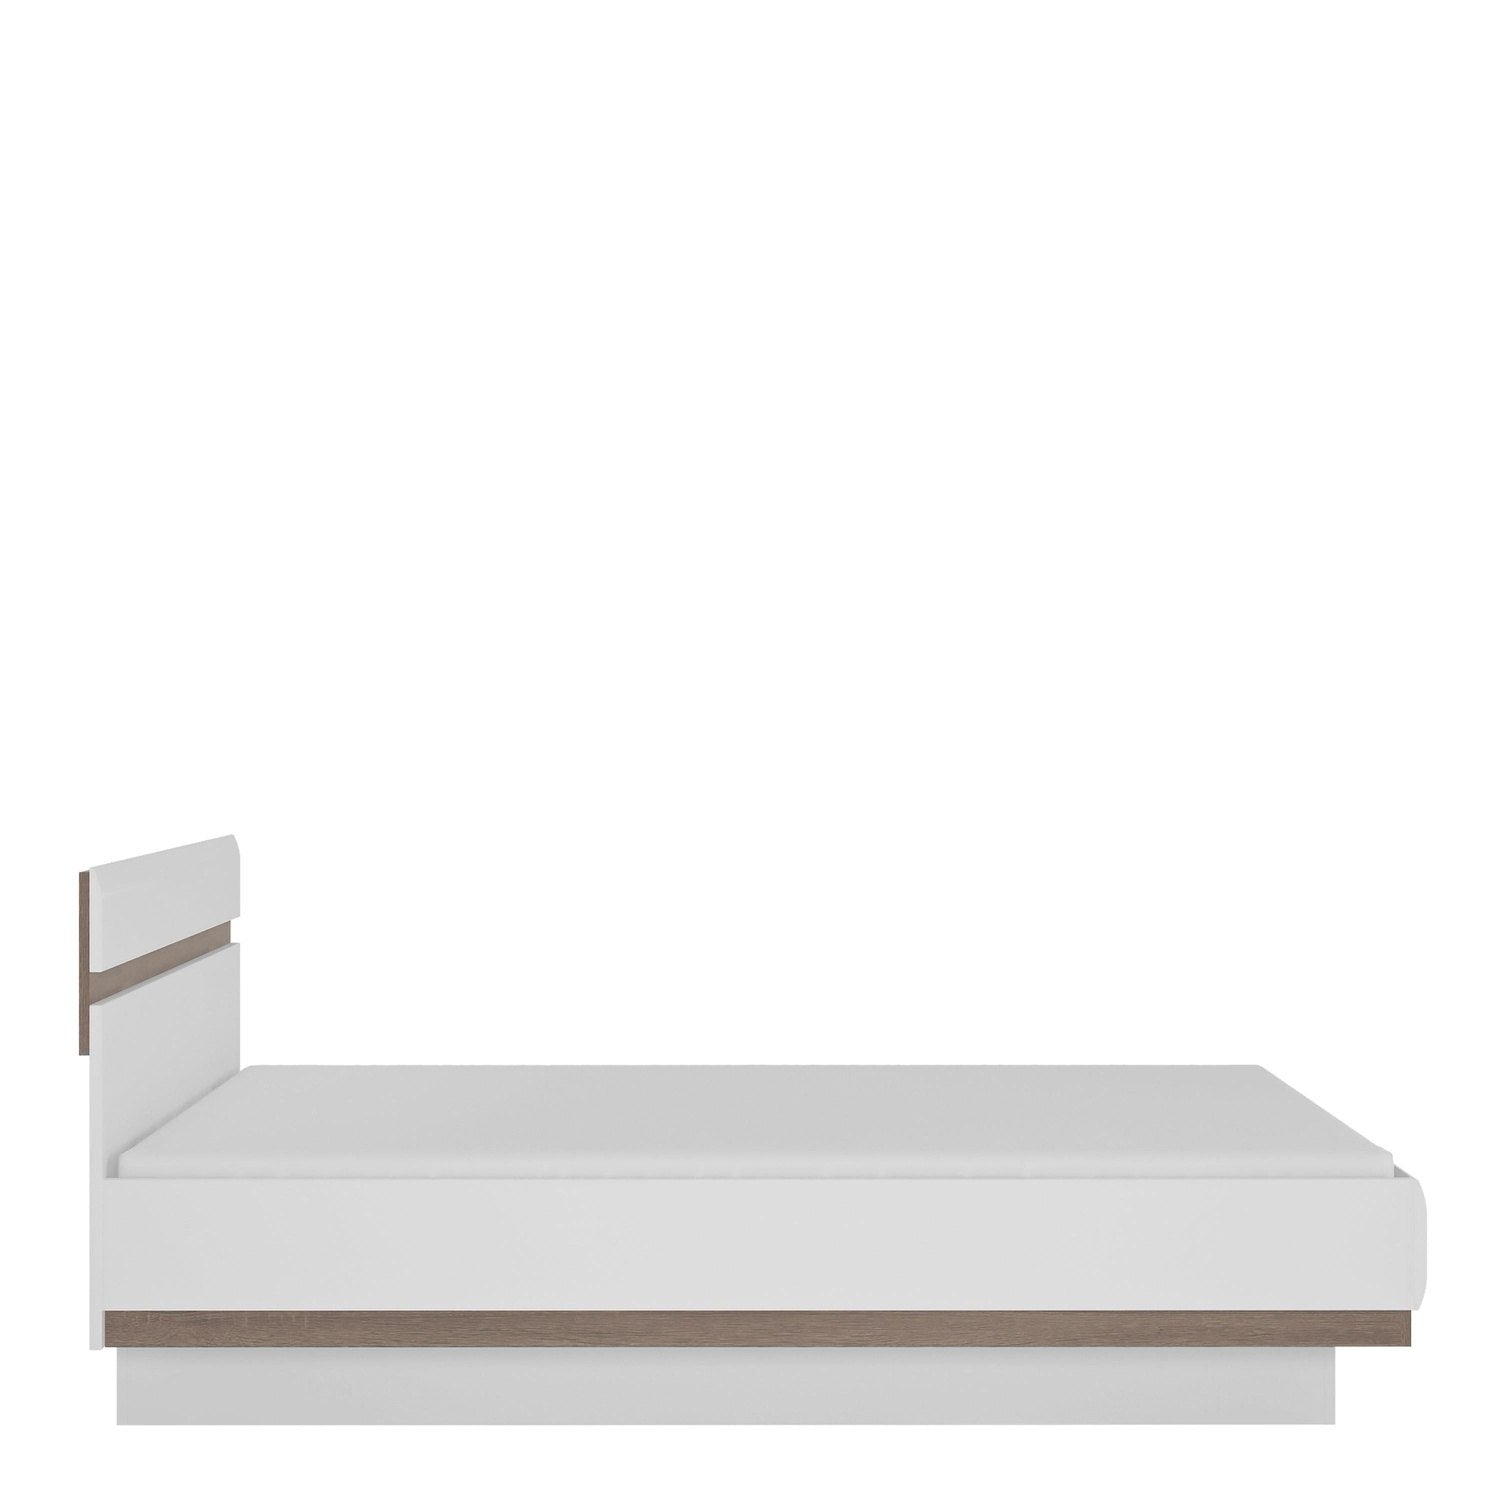 Chelsea Bed frame in White with Oak Trim